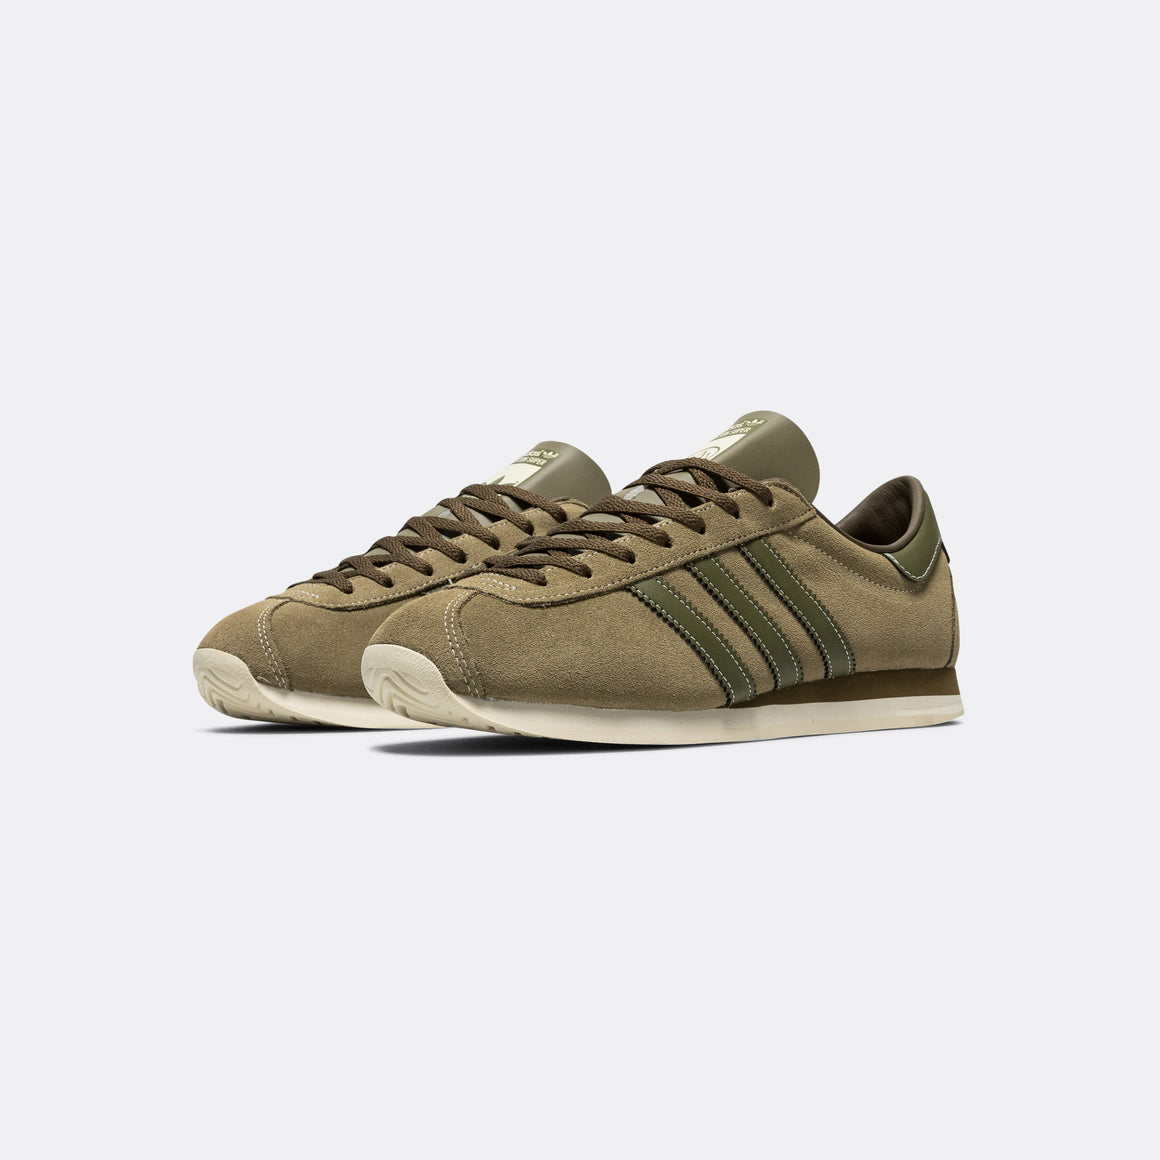 adidas - Moston Super Spzl - Cargo/Focus Olive-Trace Olive - UP THERE